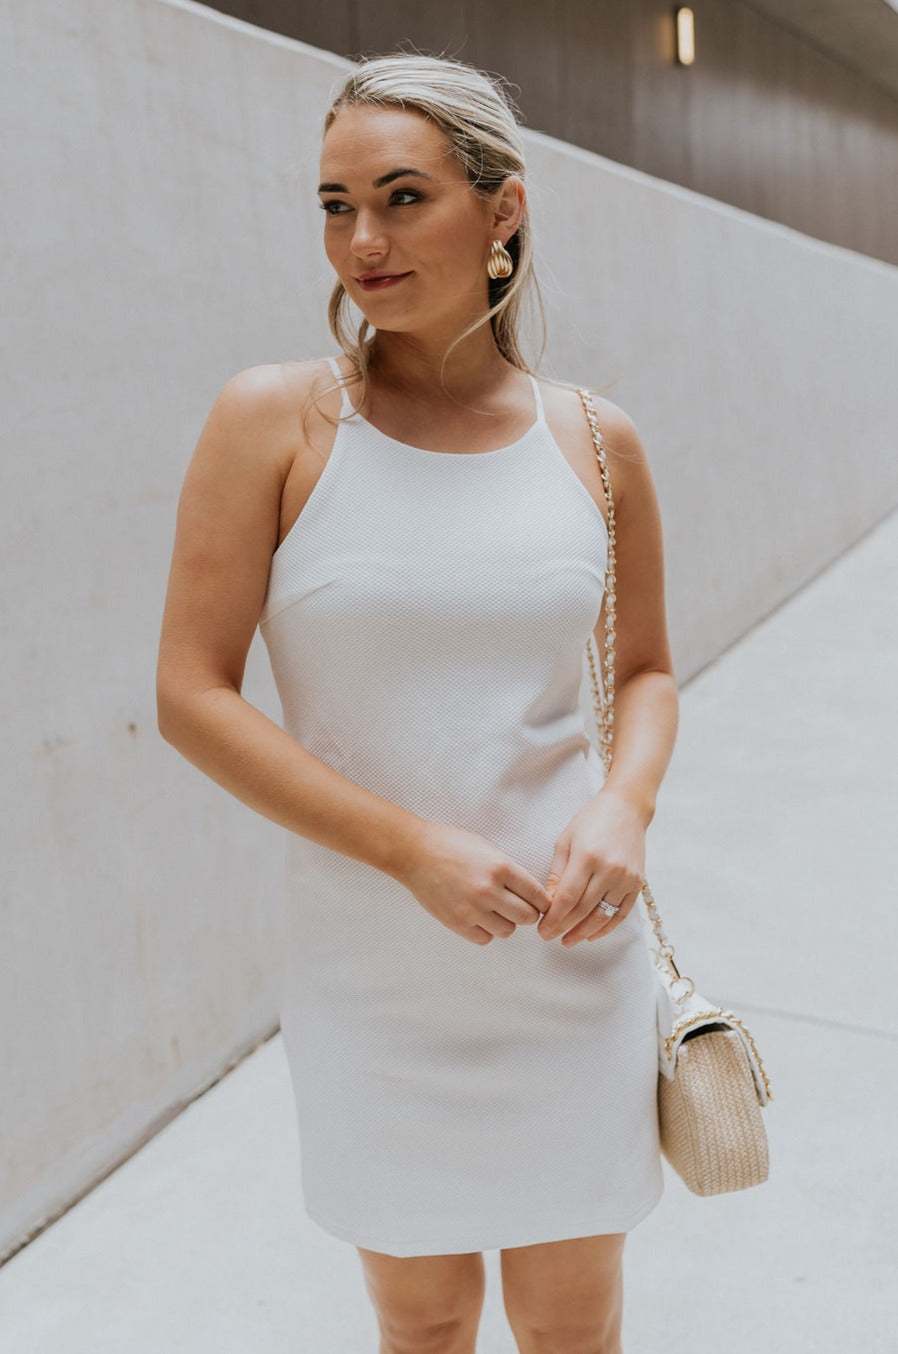 Front view of female model wearing the Nadia Off White Halter Neckline Mini Dress which features White Textured Fabric, Mini Length, White Lining, Halter Neckline and Monochrome Back Zipper with Hook Closure